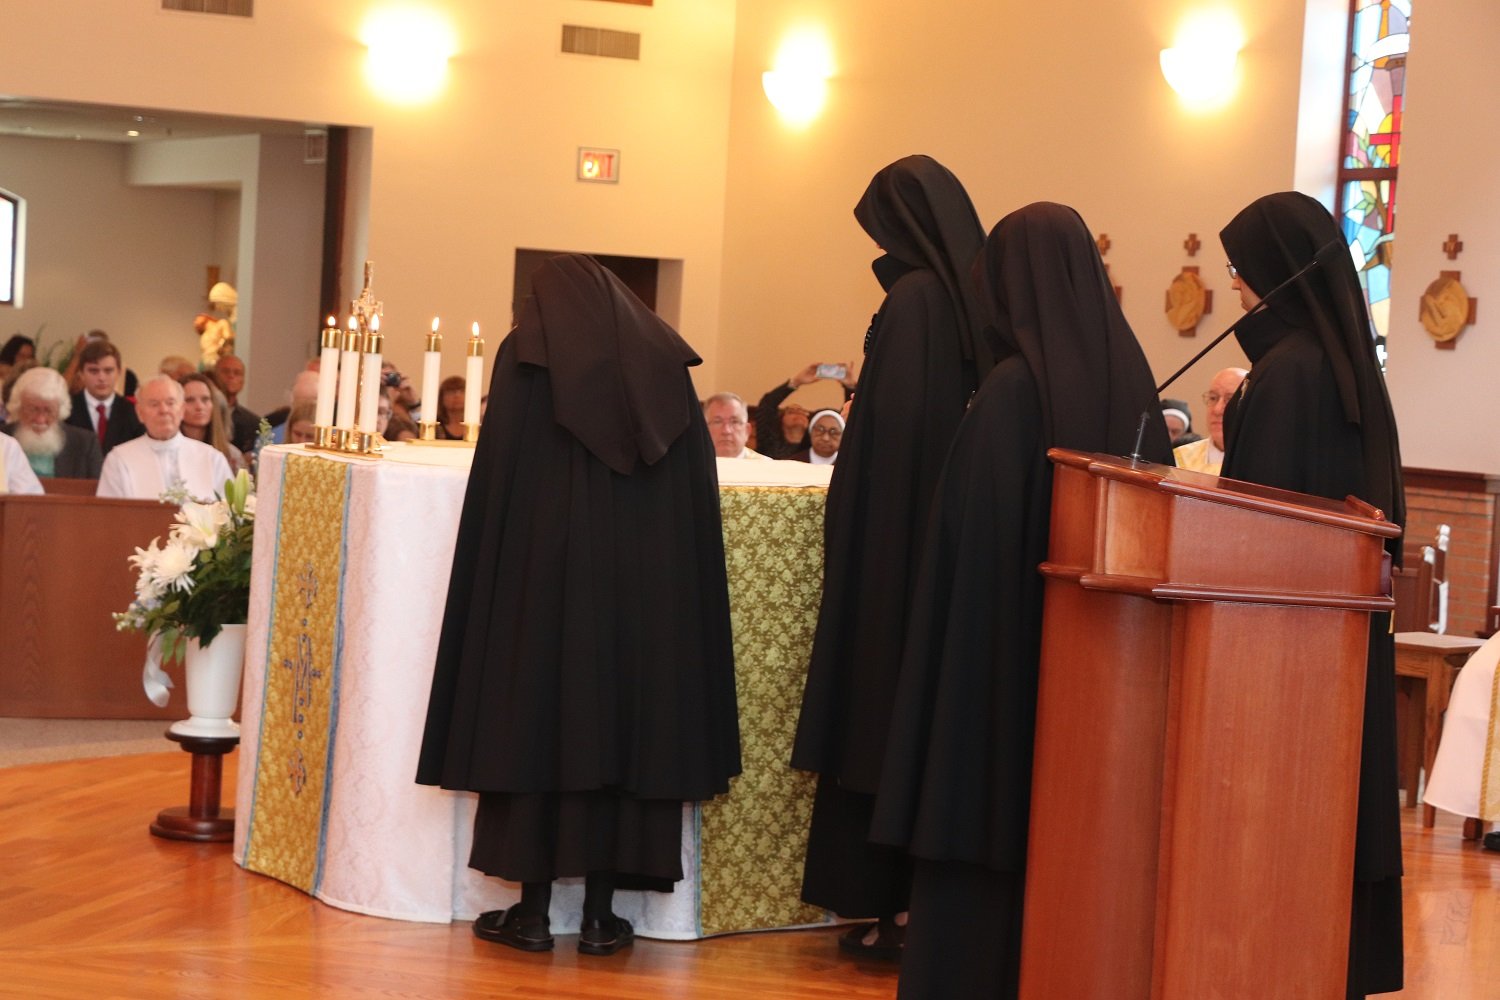  Signing the vow formula on the altar; this paper remains on the altar throughout the Mass, symbolizing the union of Sister’s self-offering with that of Christ 